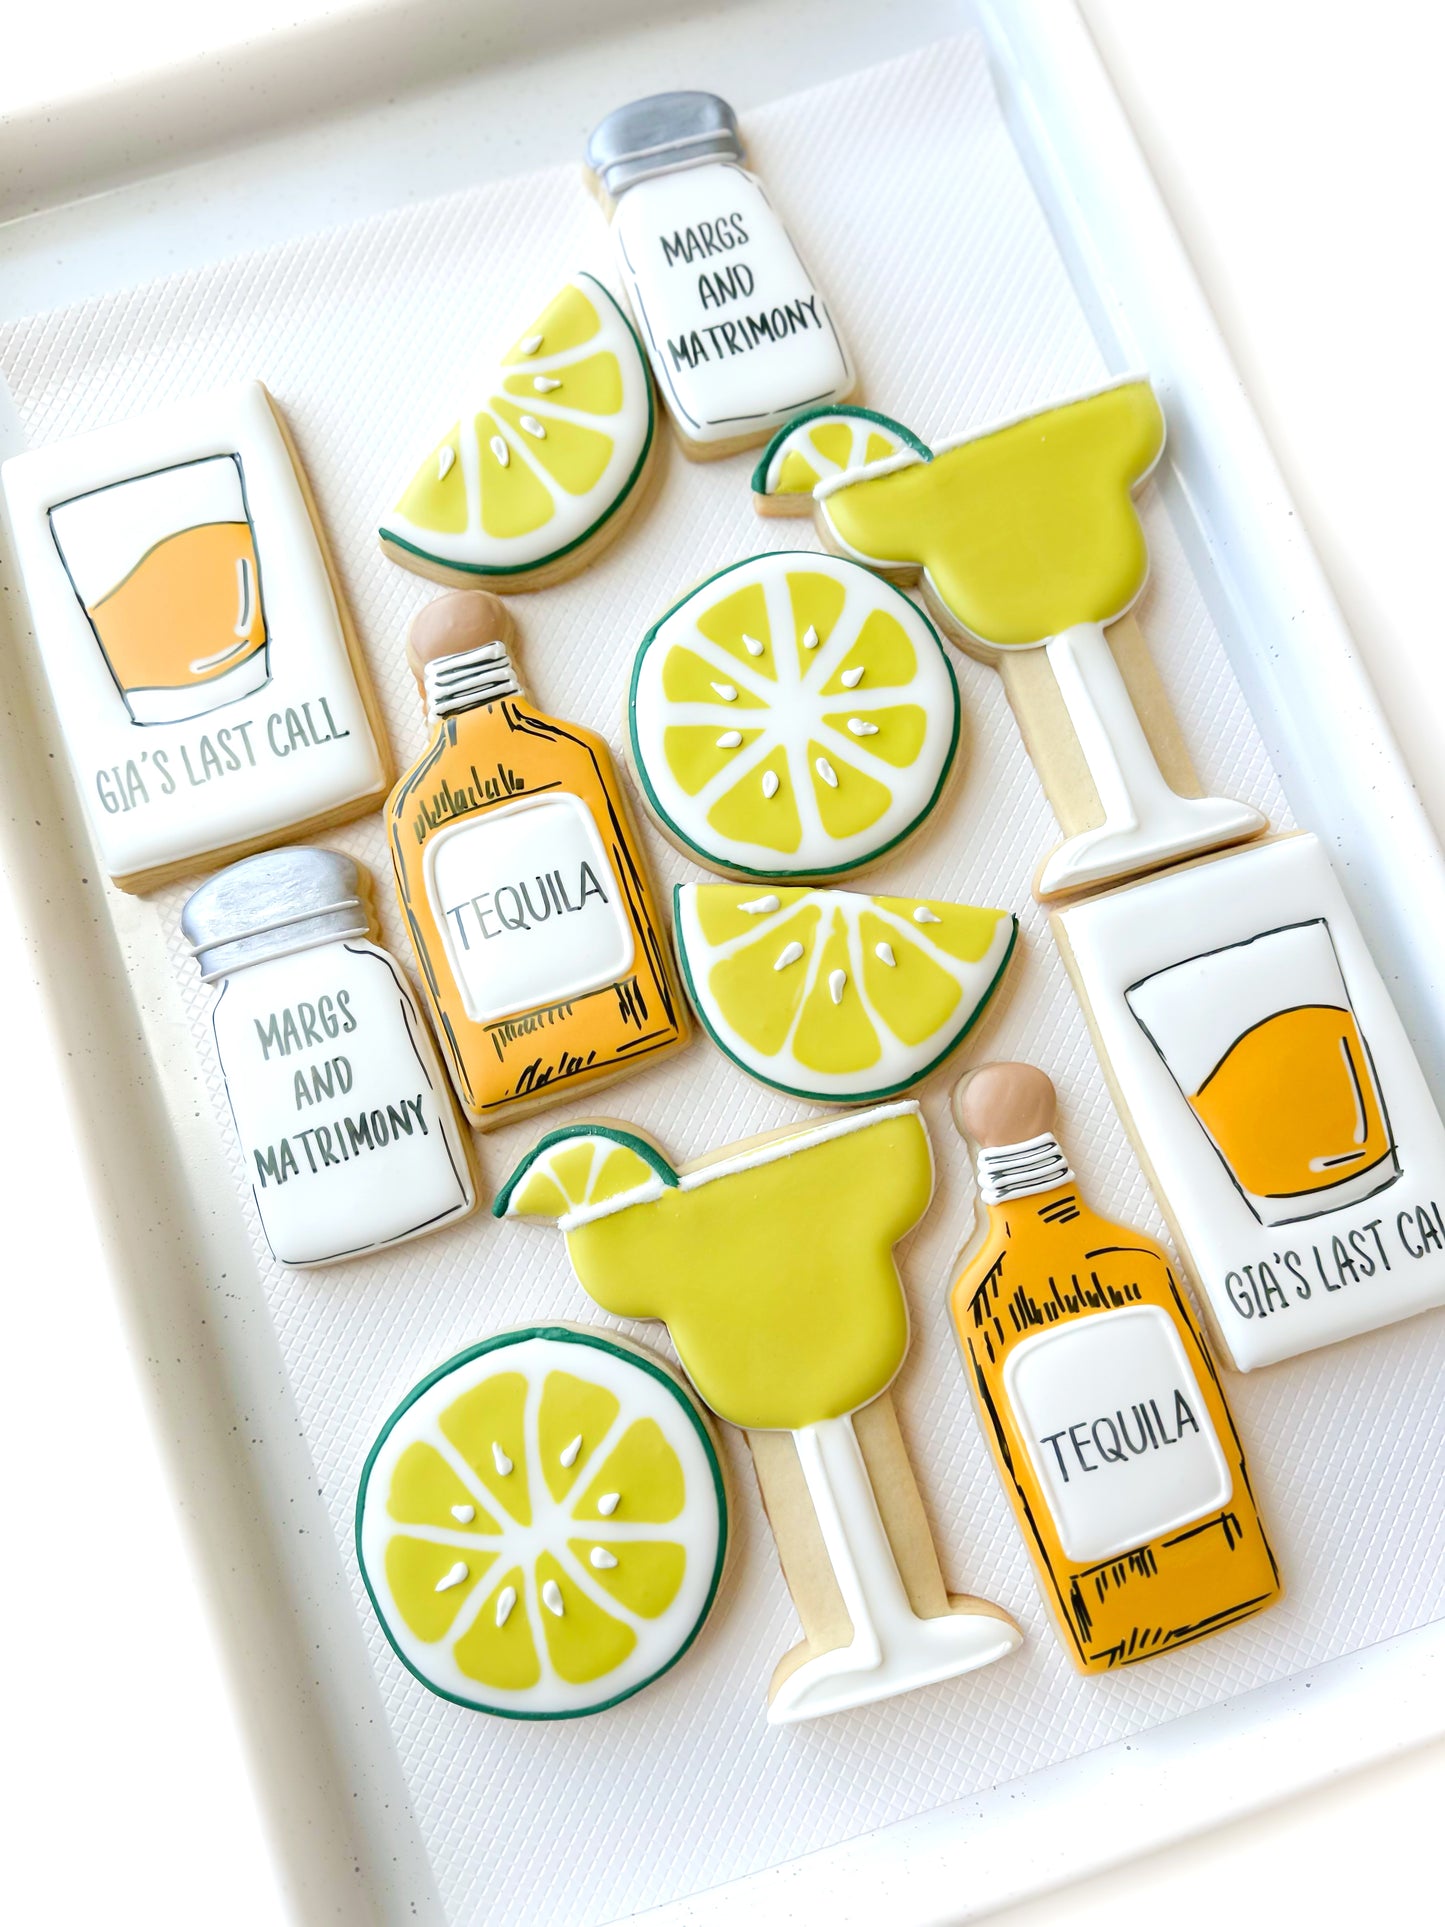 margs and matrimony wedding bridal shower cookies